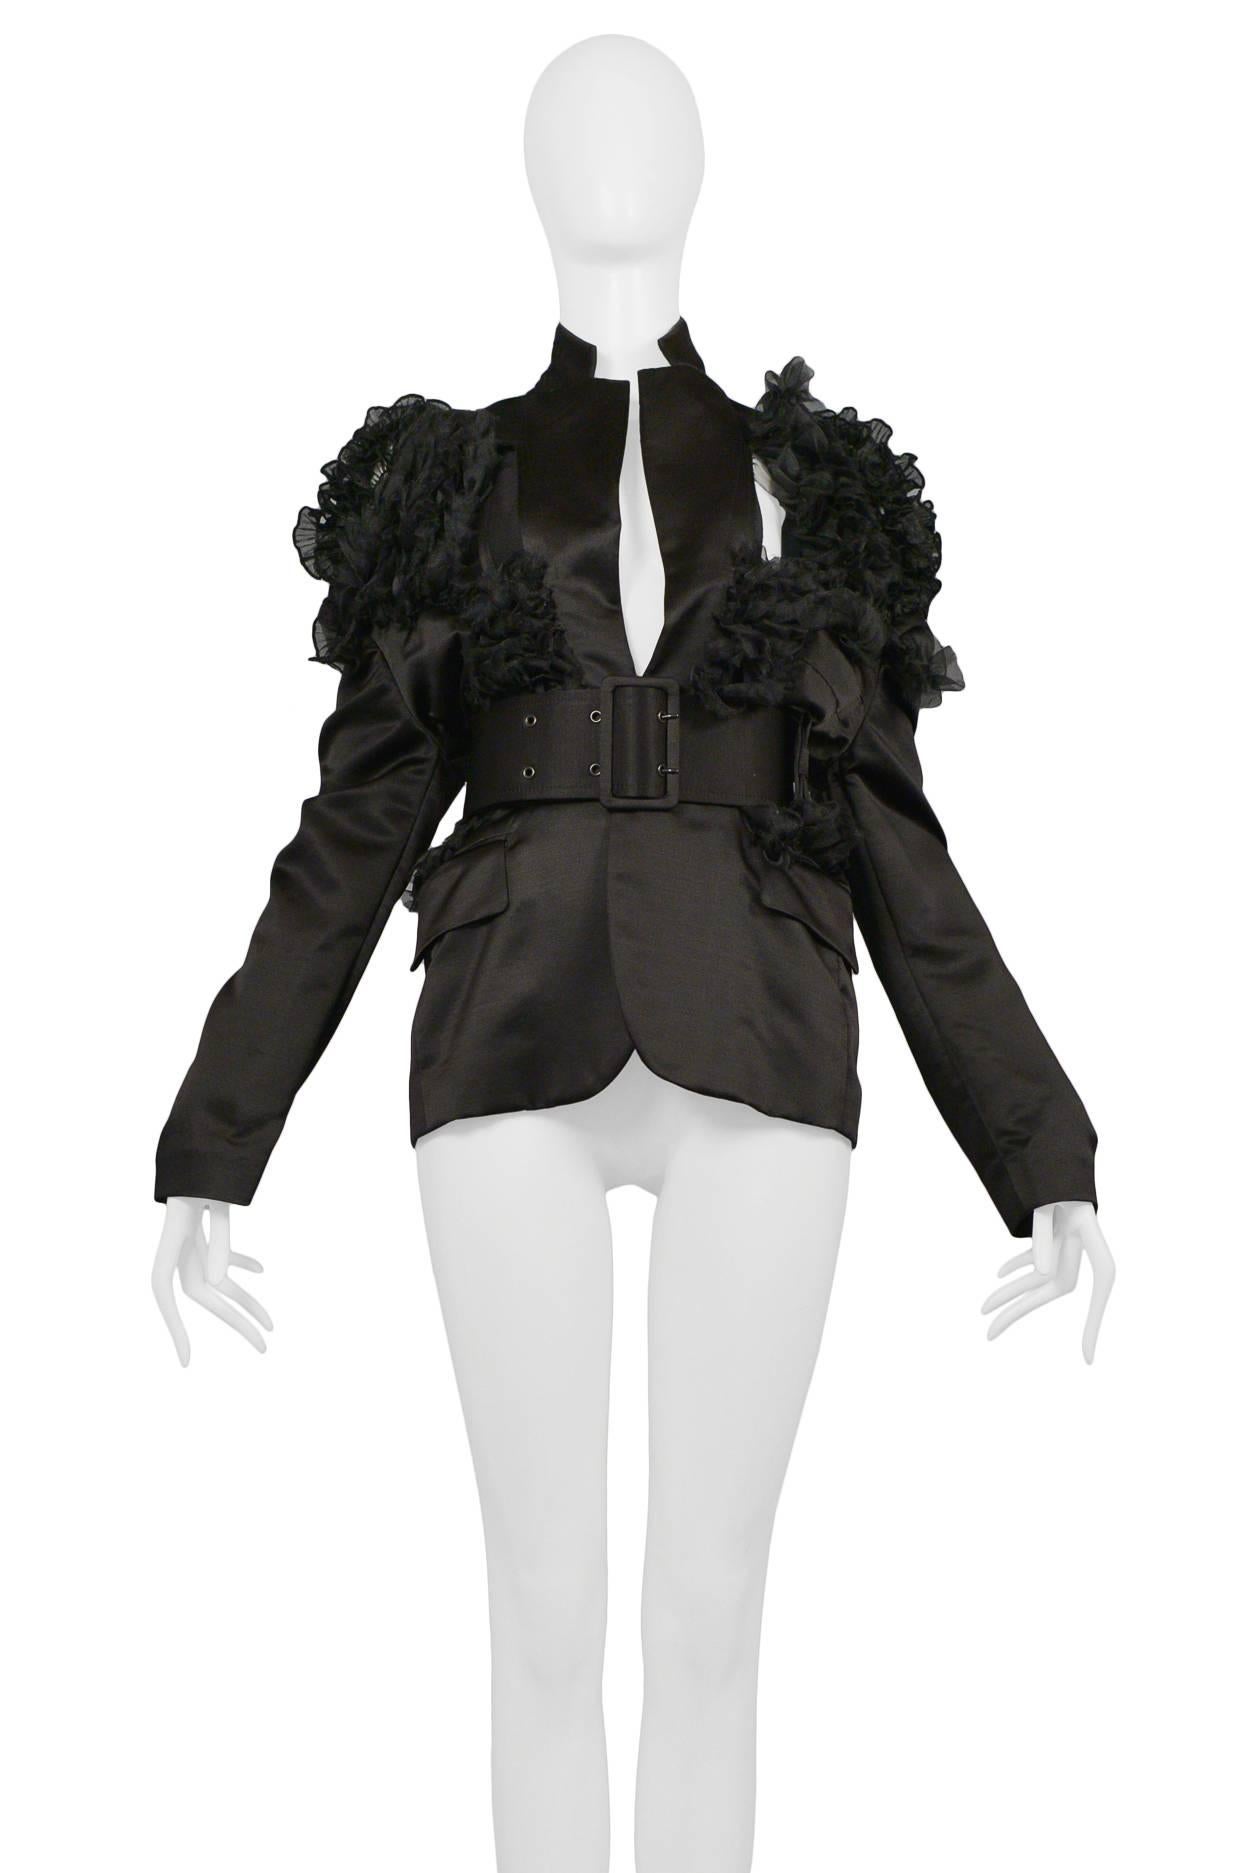 Vintage Comme des Garcons black satin pointed lapel blazer featuring ruffle organza detailing at the shoulders and torso and a matching wide buckle satin belt. Circa SS 2007.